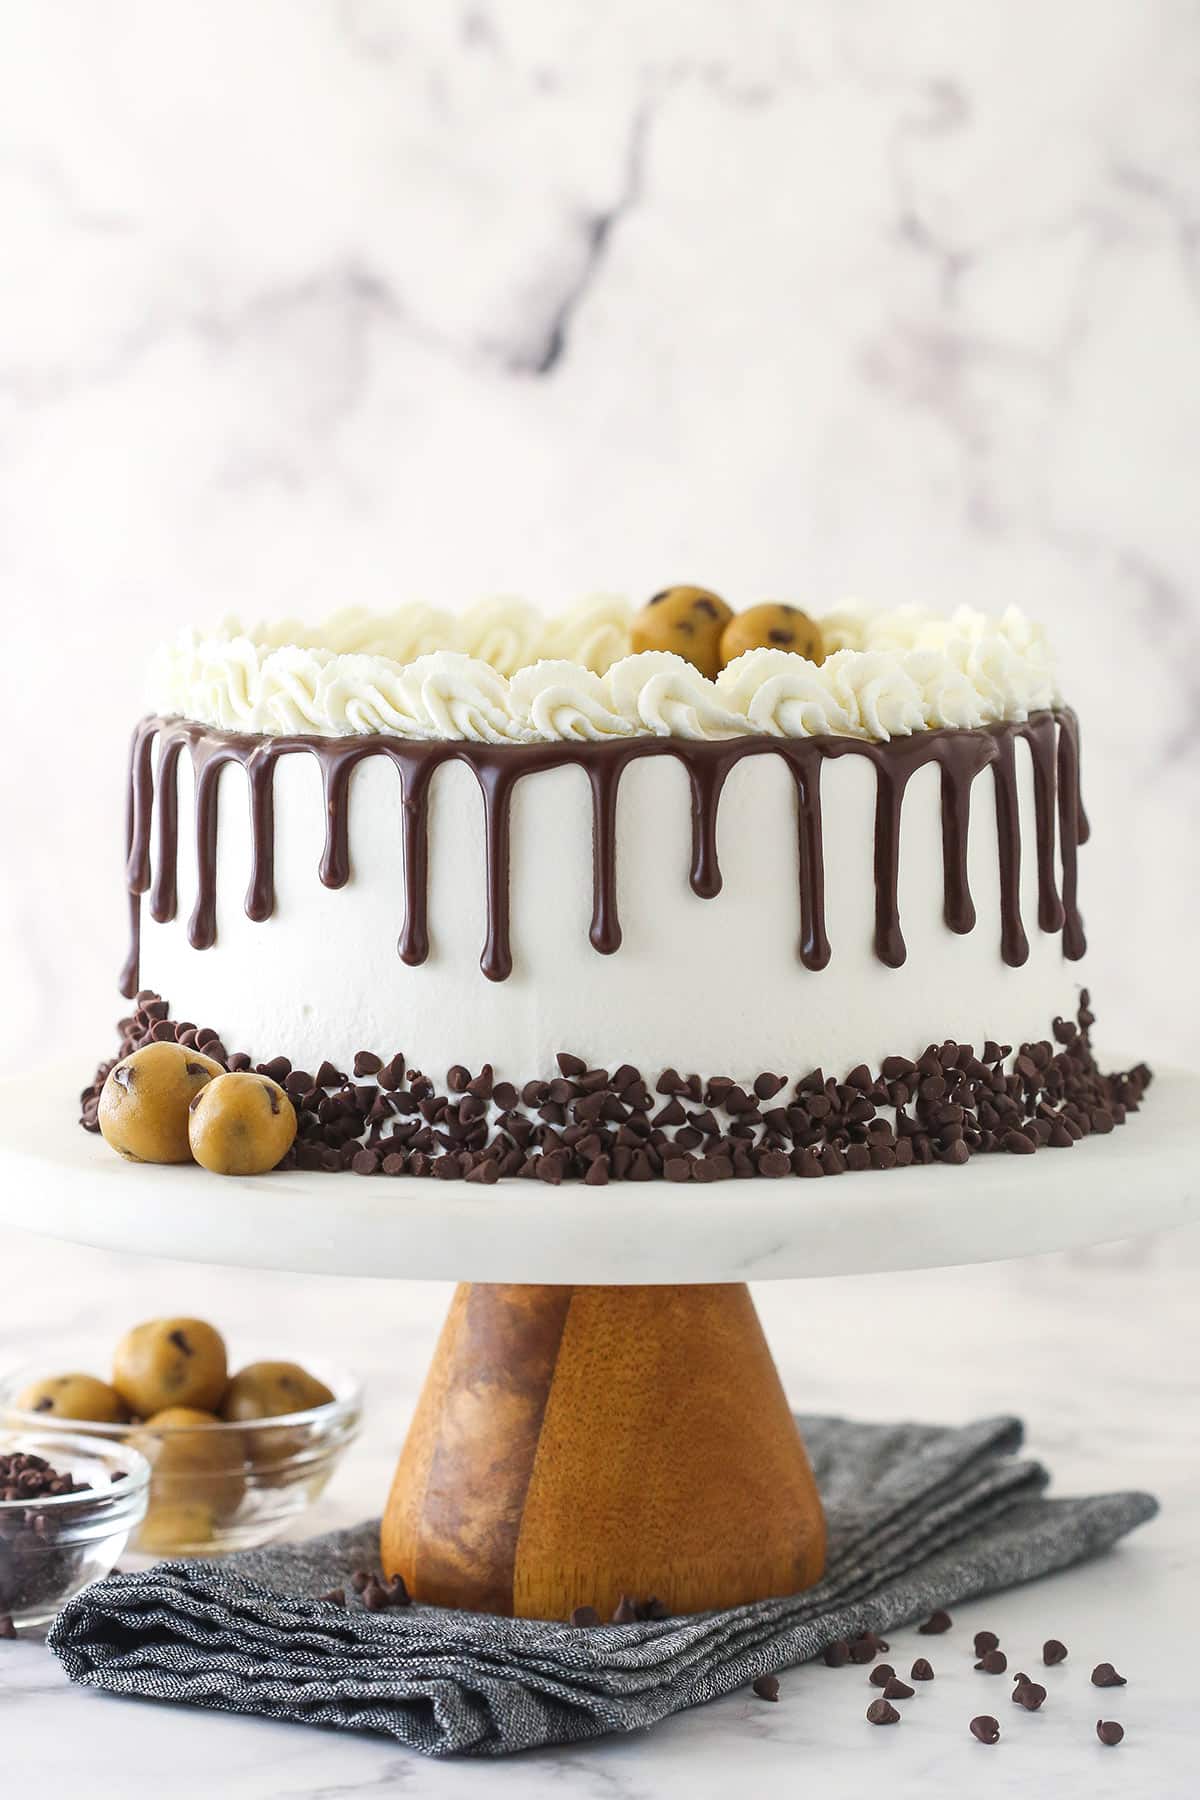 Ice cream cake on a cake stand near cookie dough and chocolate chips.